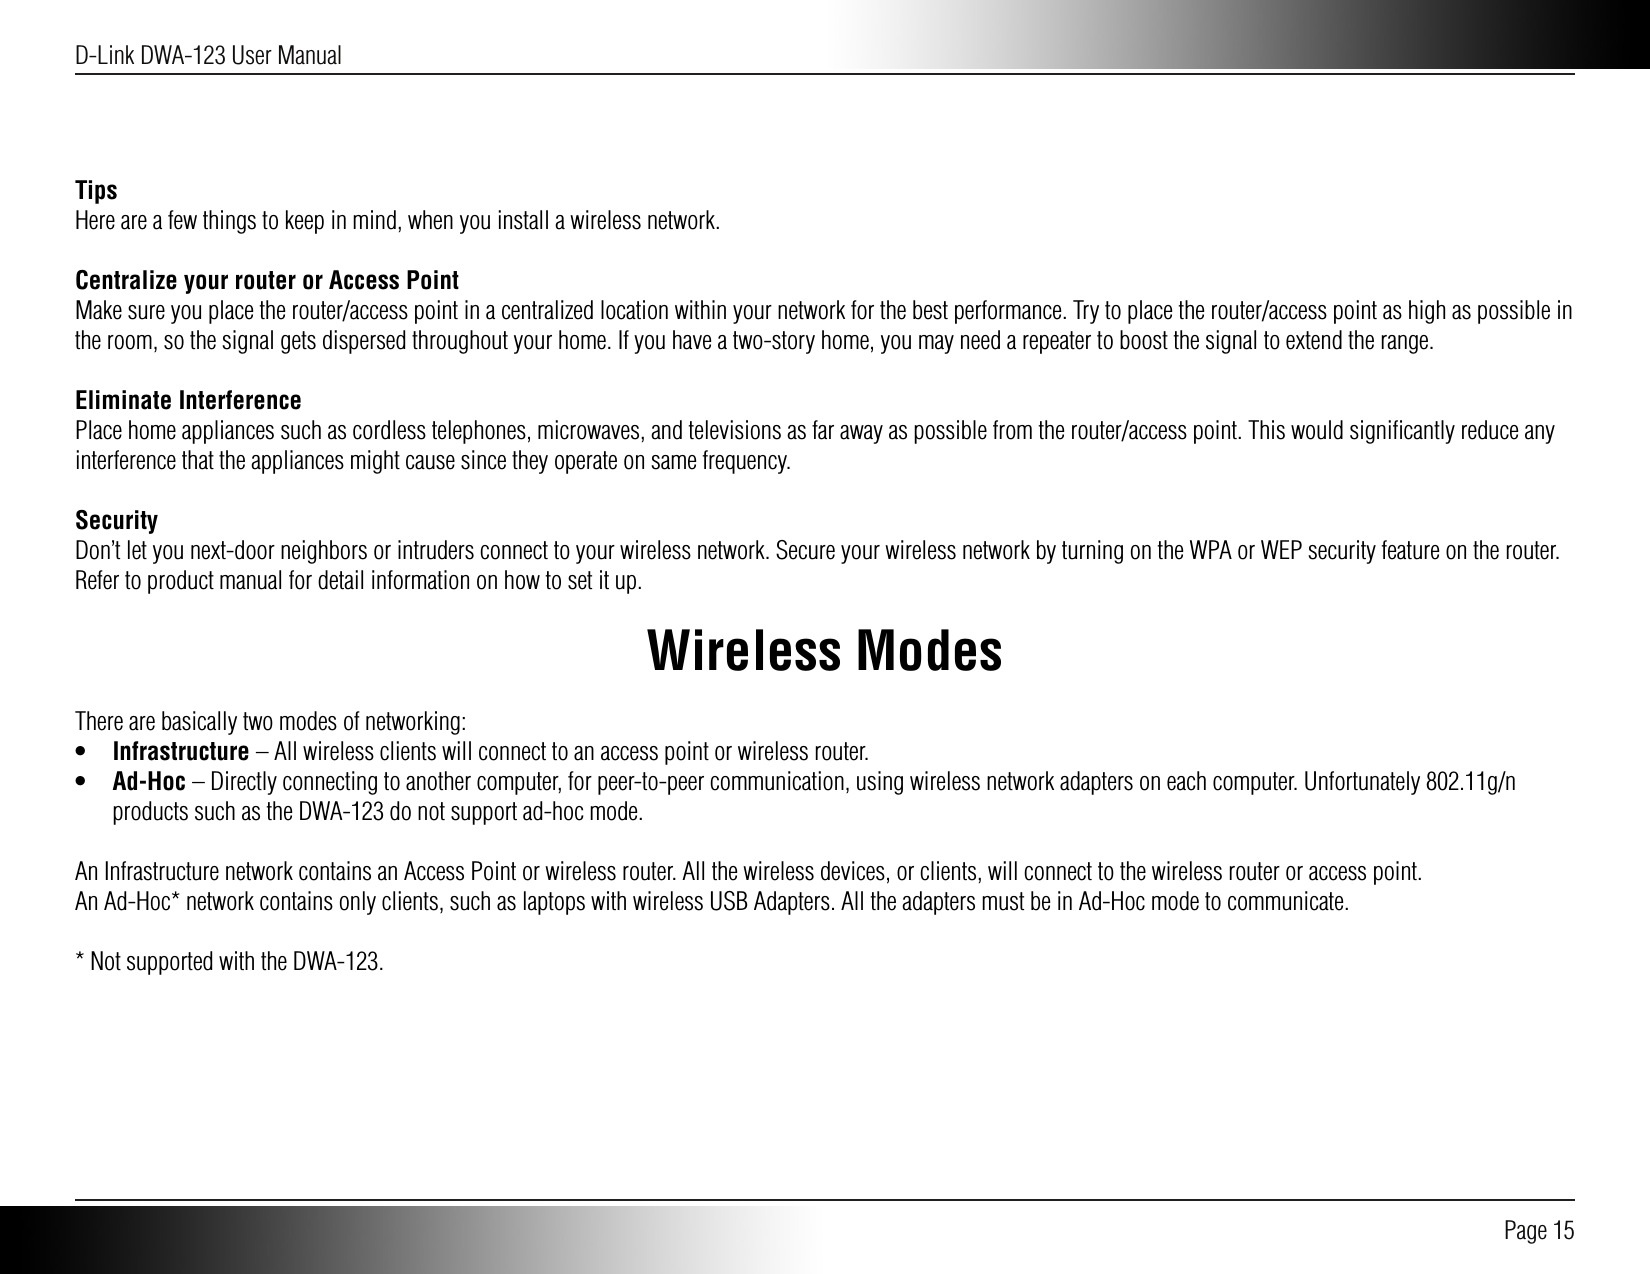 D-Link DWA-123 User Manual Page 15TipsHere are a few things to keep in mind, when you install a wireless network. Centralize your router or Access PointMake sure you place the router/access point in a centralized location within your network for the best performance. Try to place the router/access point as high as possible in the room, so the signal gets dispersed throughout your home. If you have a two-story home, you may need a repeater to boost the signal to extend the range.Eliminate InterferencePlace home appliances such as cordless telephones, microwaves, and televisions as far away as possible from the router/access point. This would signiﬁcantly reduce any interference that the appliances might cause since they operate on same frequency.SecurityDon’t let you next-door neighbors or intruders connect to your wireless network. Secure your wireless network by turning on the WPA or WEP security feature on the router. Refer to product manual for detail information on how to set it up.Wireless ModesThere are basically two modes of networking:•  Infrastructure – All wireless clients will connect to an access point or wireless router.•  Ad-Hoc – Directly connecting to another computer, for peer-to-peer communication, using wireless network adapters on each computer. Unfortunately 802.11g/n products such as the DWA-123 do not support ad-hoc mode.An Infrastructure network contains an Access Point or wireless router. All the wireless devices, or clients, will connect to the wireless router or access point.An Ad-Hoc* network contains only clients, such as laptops with wireless USB Adapters. All the adapters must be in Ad-Hoc mode to communicate.* Not supported with the DWA-123.